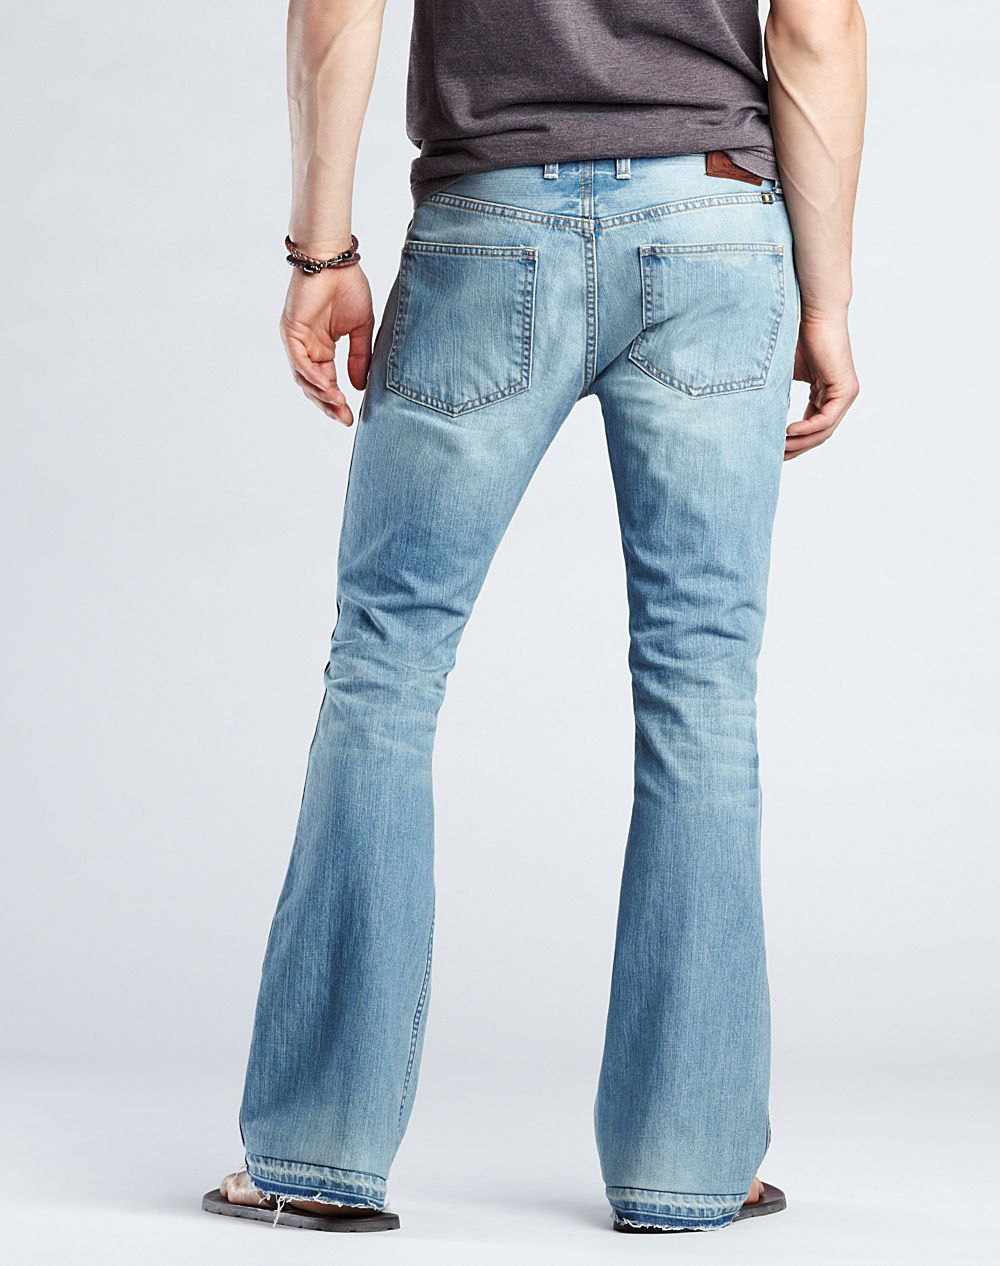 Lucky Brand 70s Boot Jeans in Blue for Men - Lyst